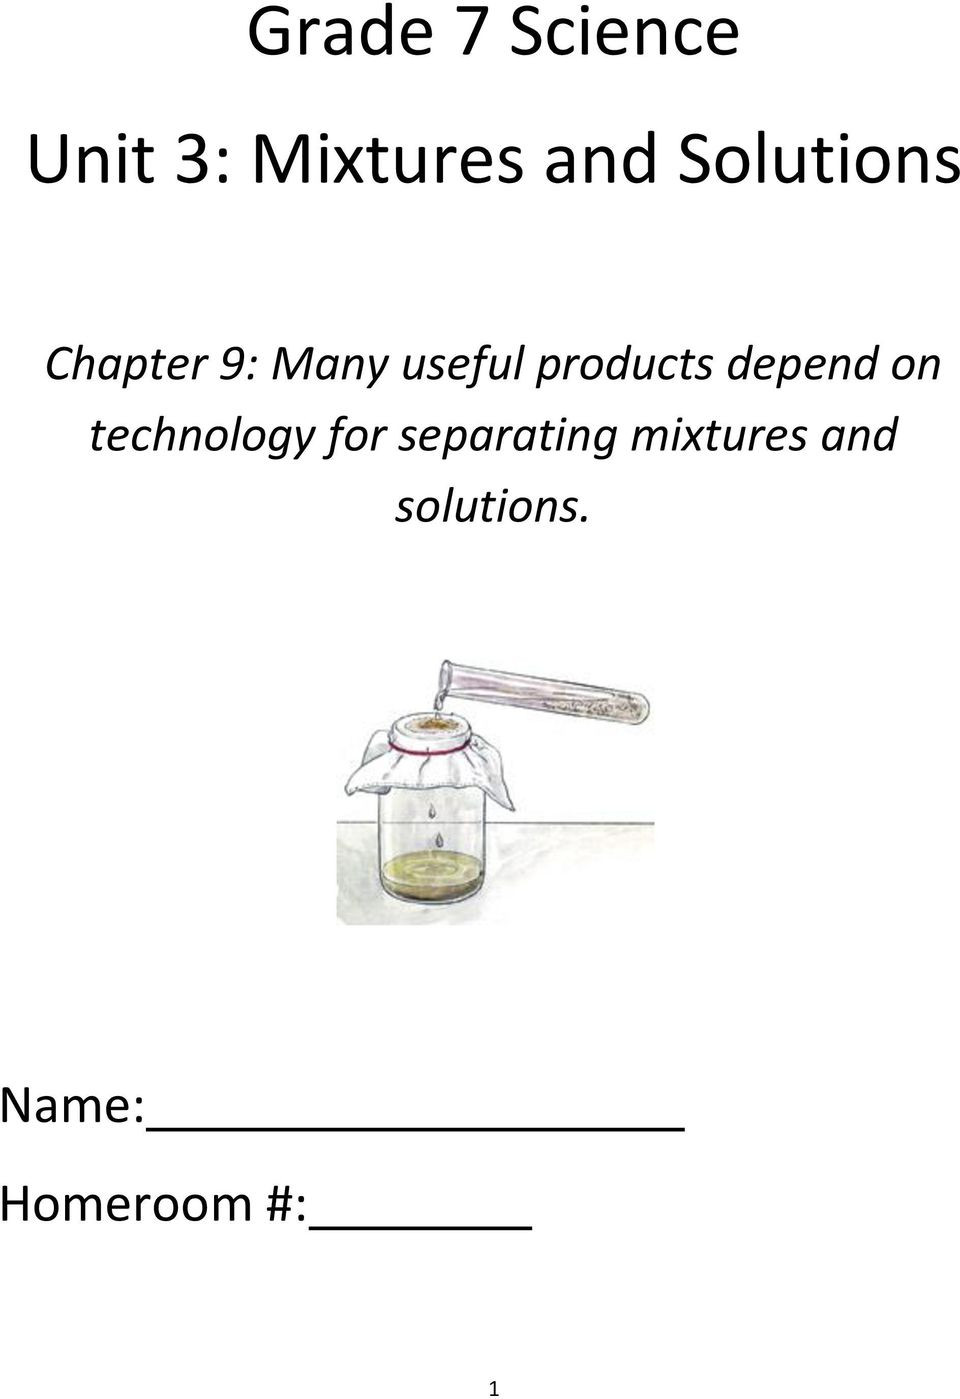 Mixtures and solutions Worksheet Answers Grade 7 Science Unit 3 Mixtures and solutions Pdf Free